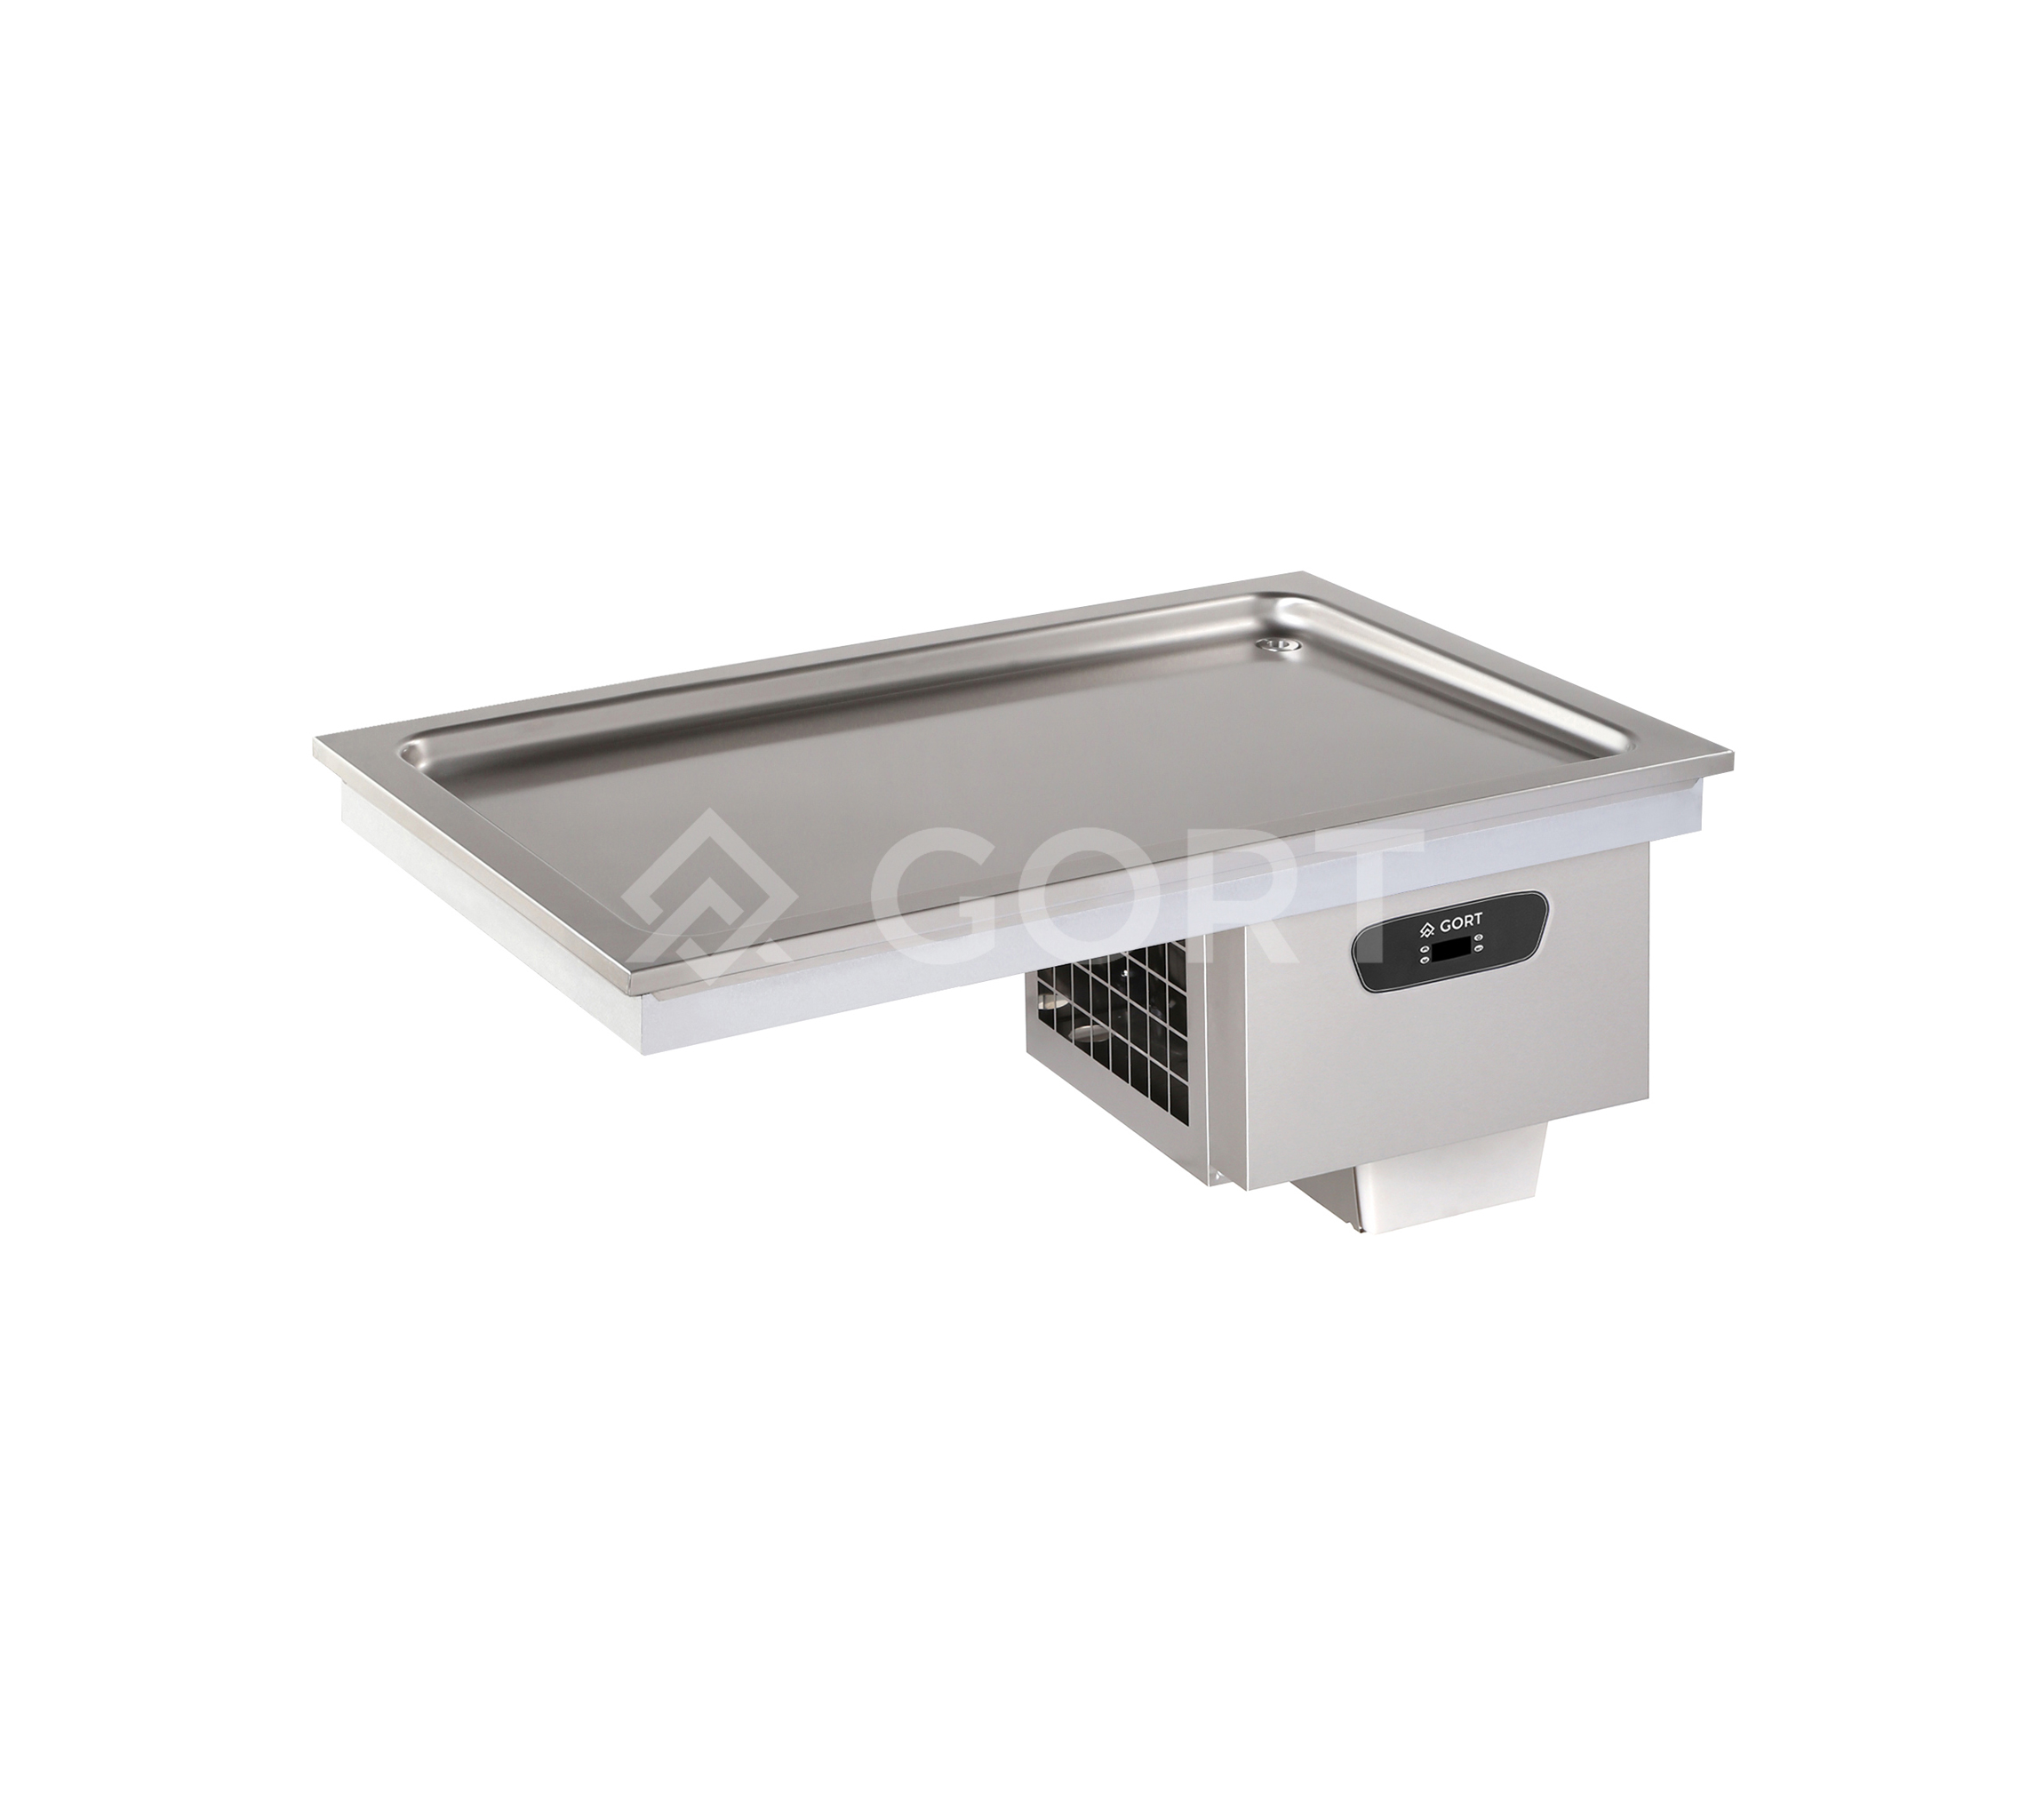 Refrigerated static top DROP-IN, 3 x GN1/1